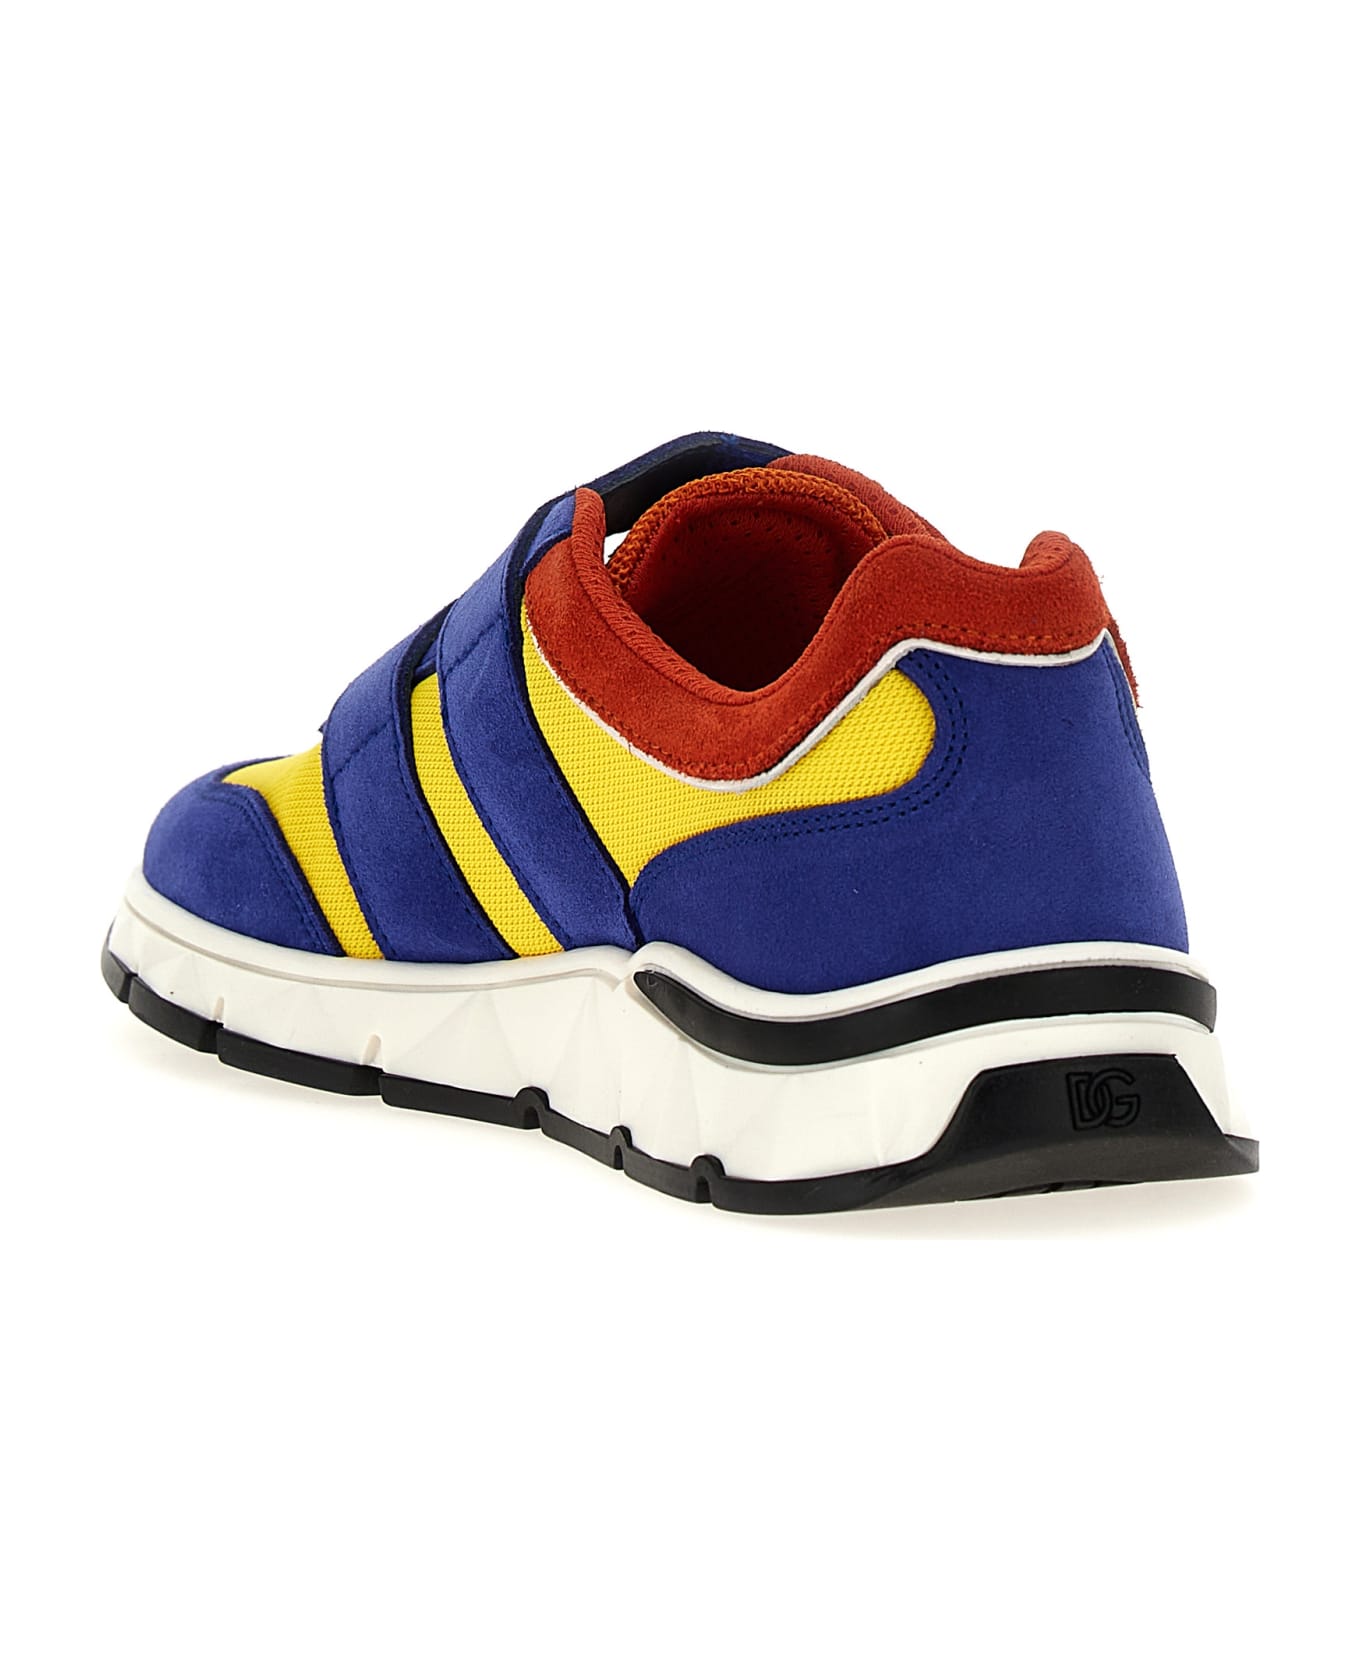 Dolce & Gabbana 'surf Camp' Sneakers - Multicolor